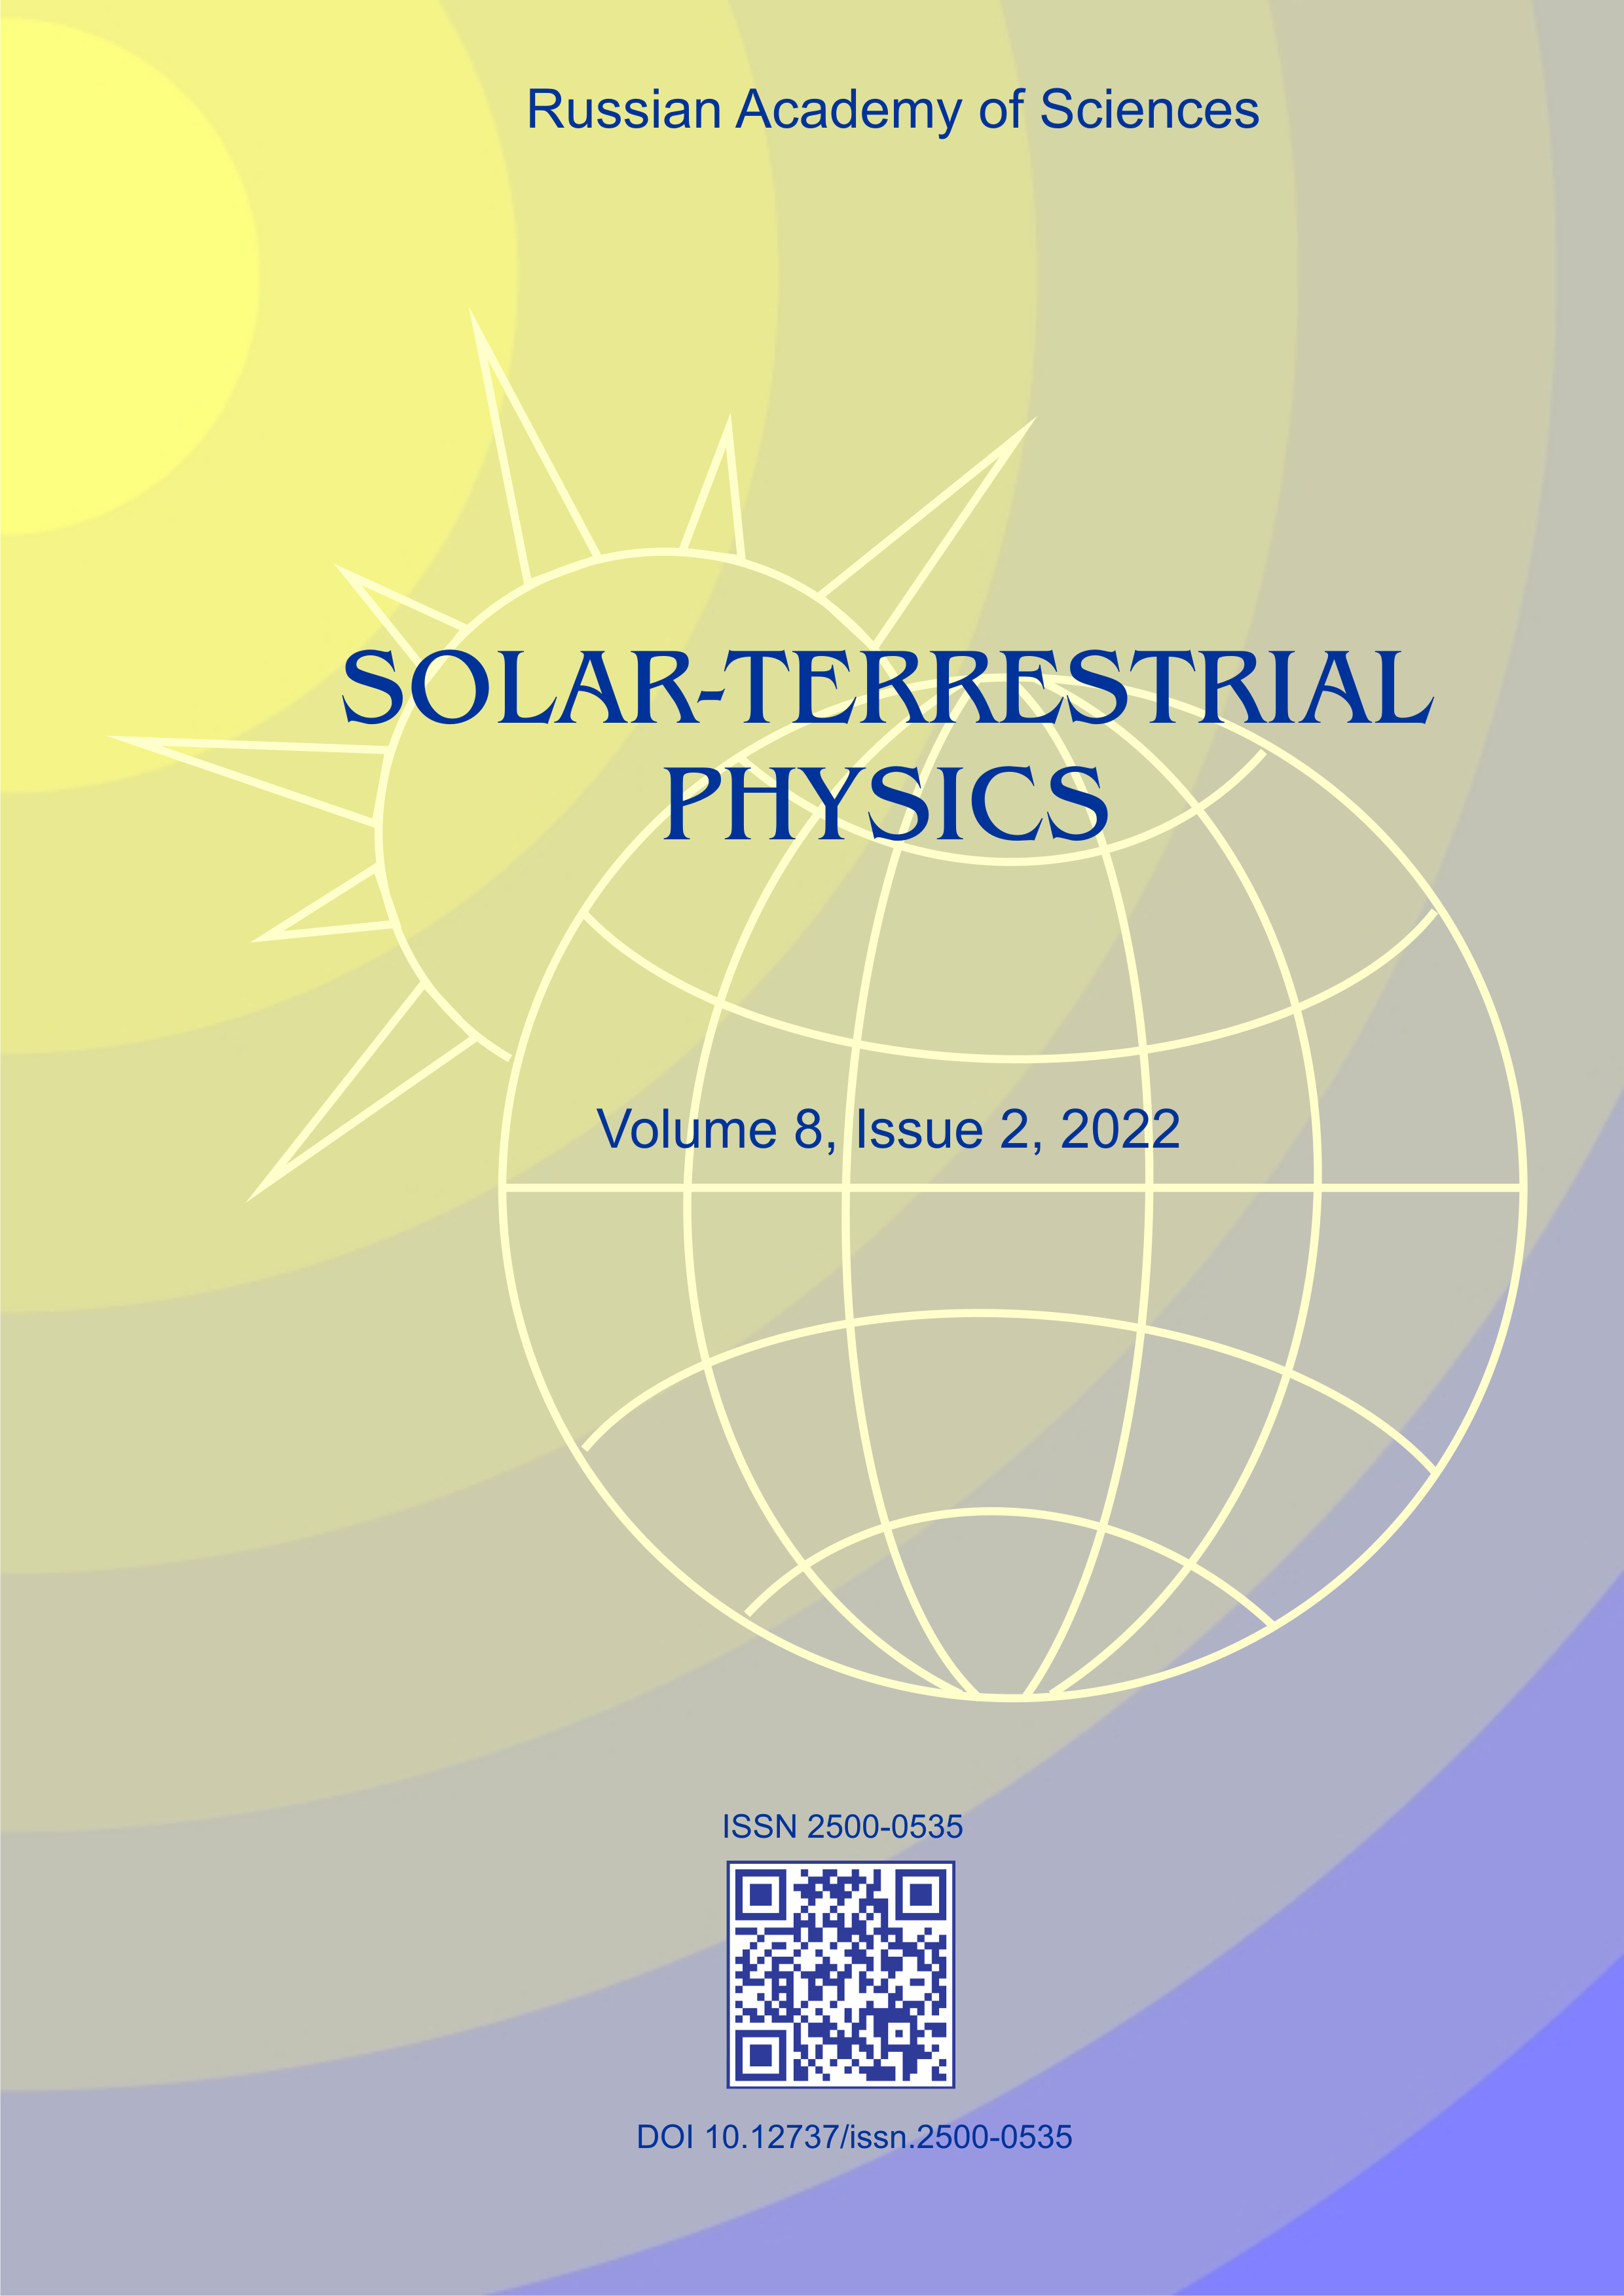                         Coherent microwave emission as an indicator of non-thermal energy release at a coronal X-ray point
            